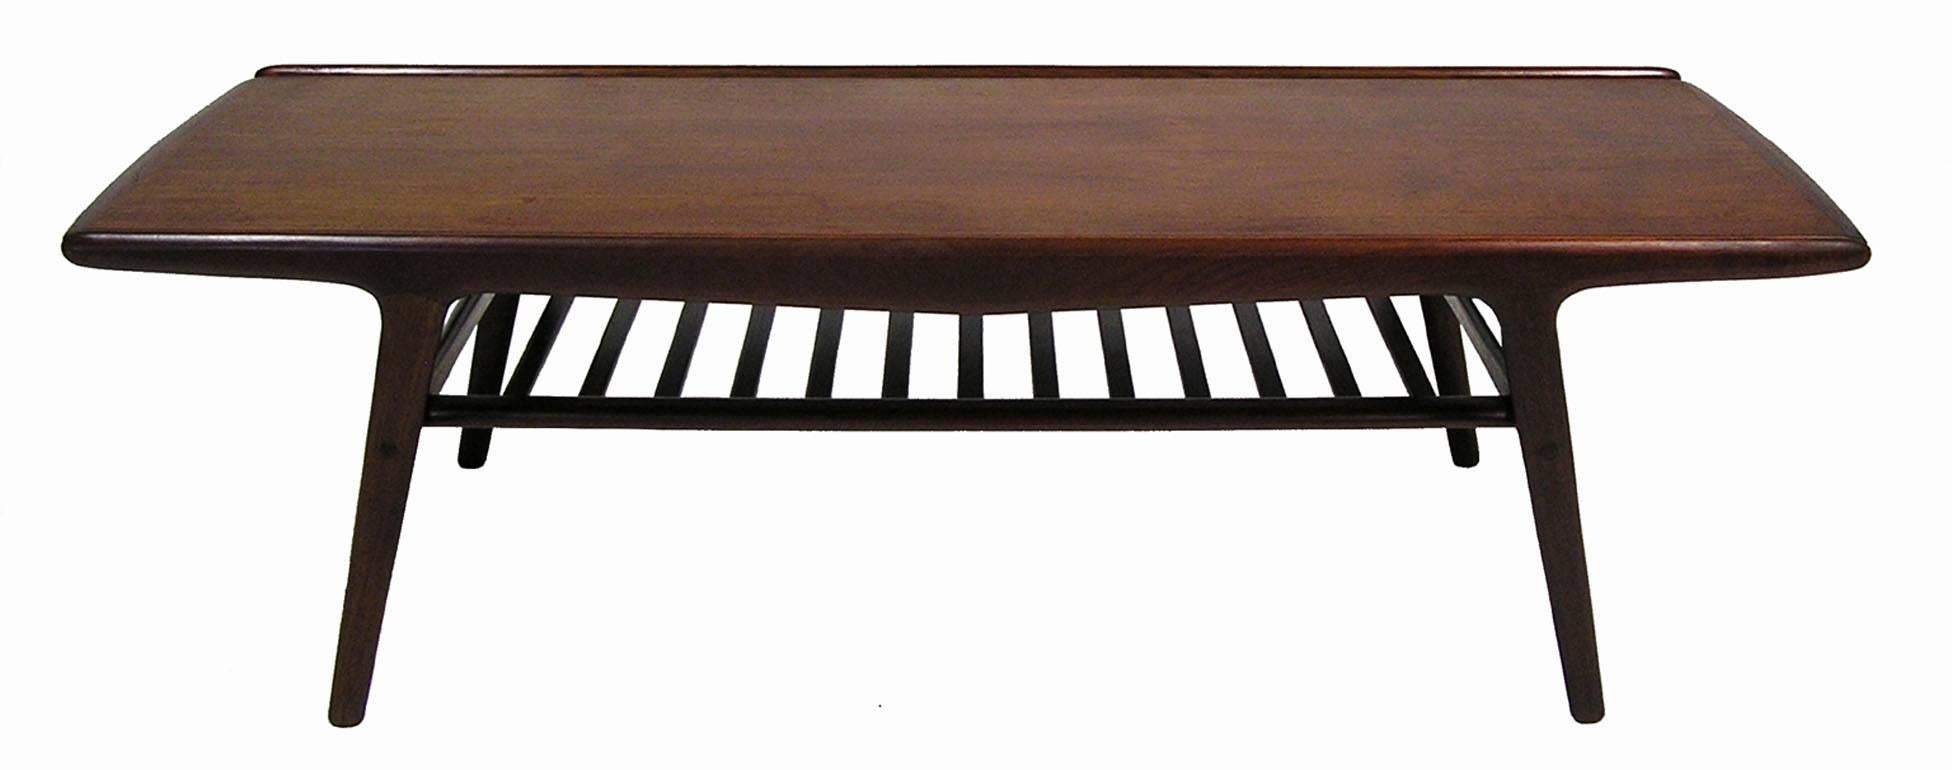 A rare teak coffee table from the 1950s designed by Arne Hovmand-Olsen for Mogens Kold of Denmark. Amazing craftsmanship throughout featuring stylish Danish Modern era lines with a uniquely designed inset floating top and slated lower shelf. A